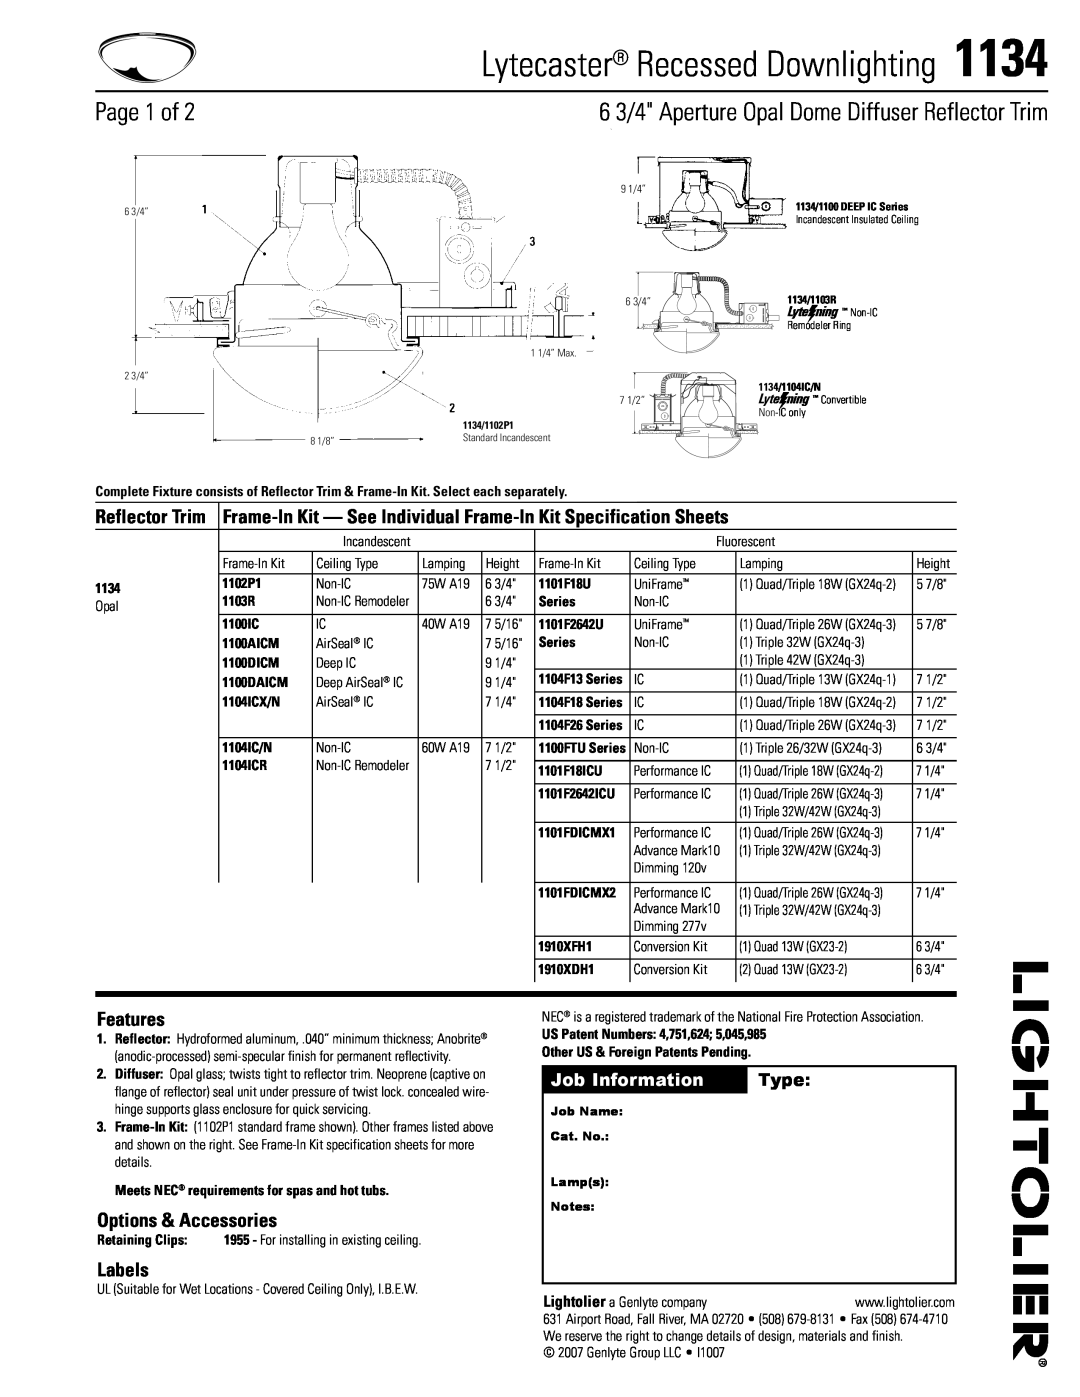 Lightolier 1134 specifications Lytecaster Recessed Downlighting, Page  of, Reflector Trim, Job Information, Type, Labels 